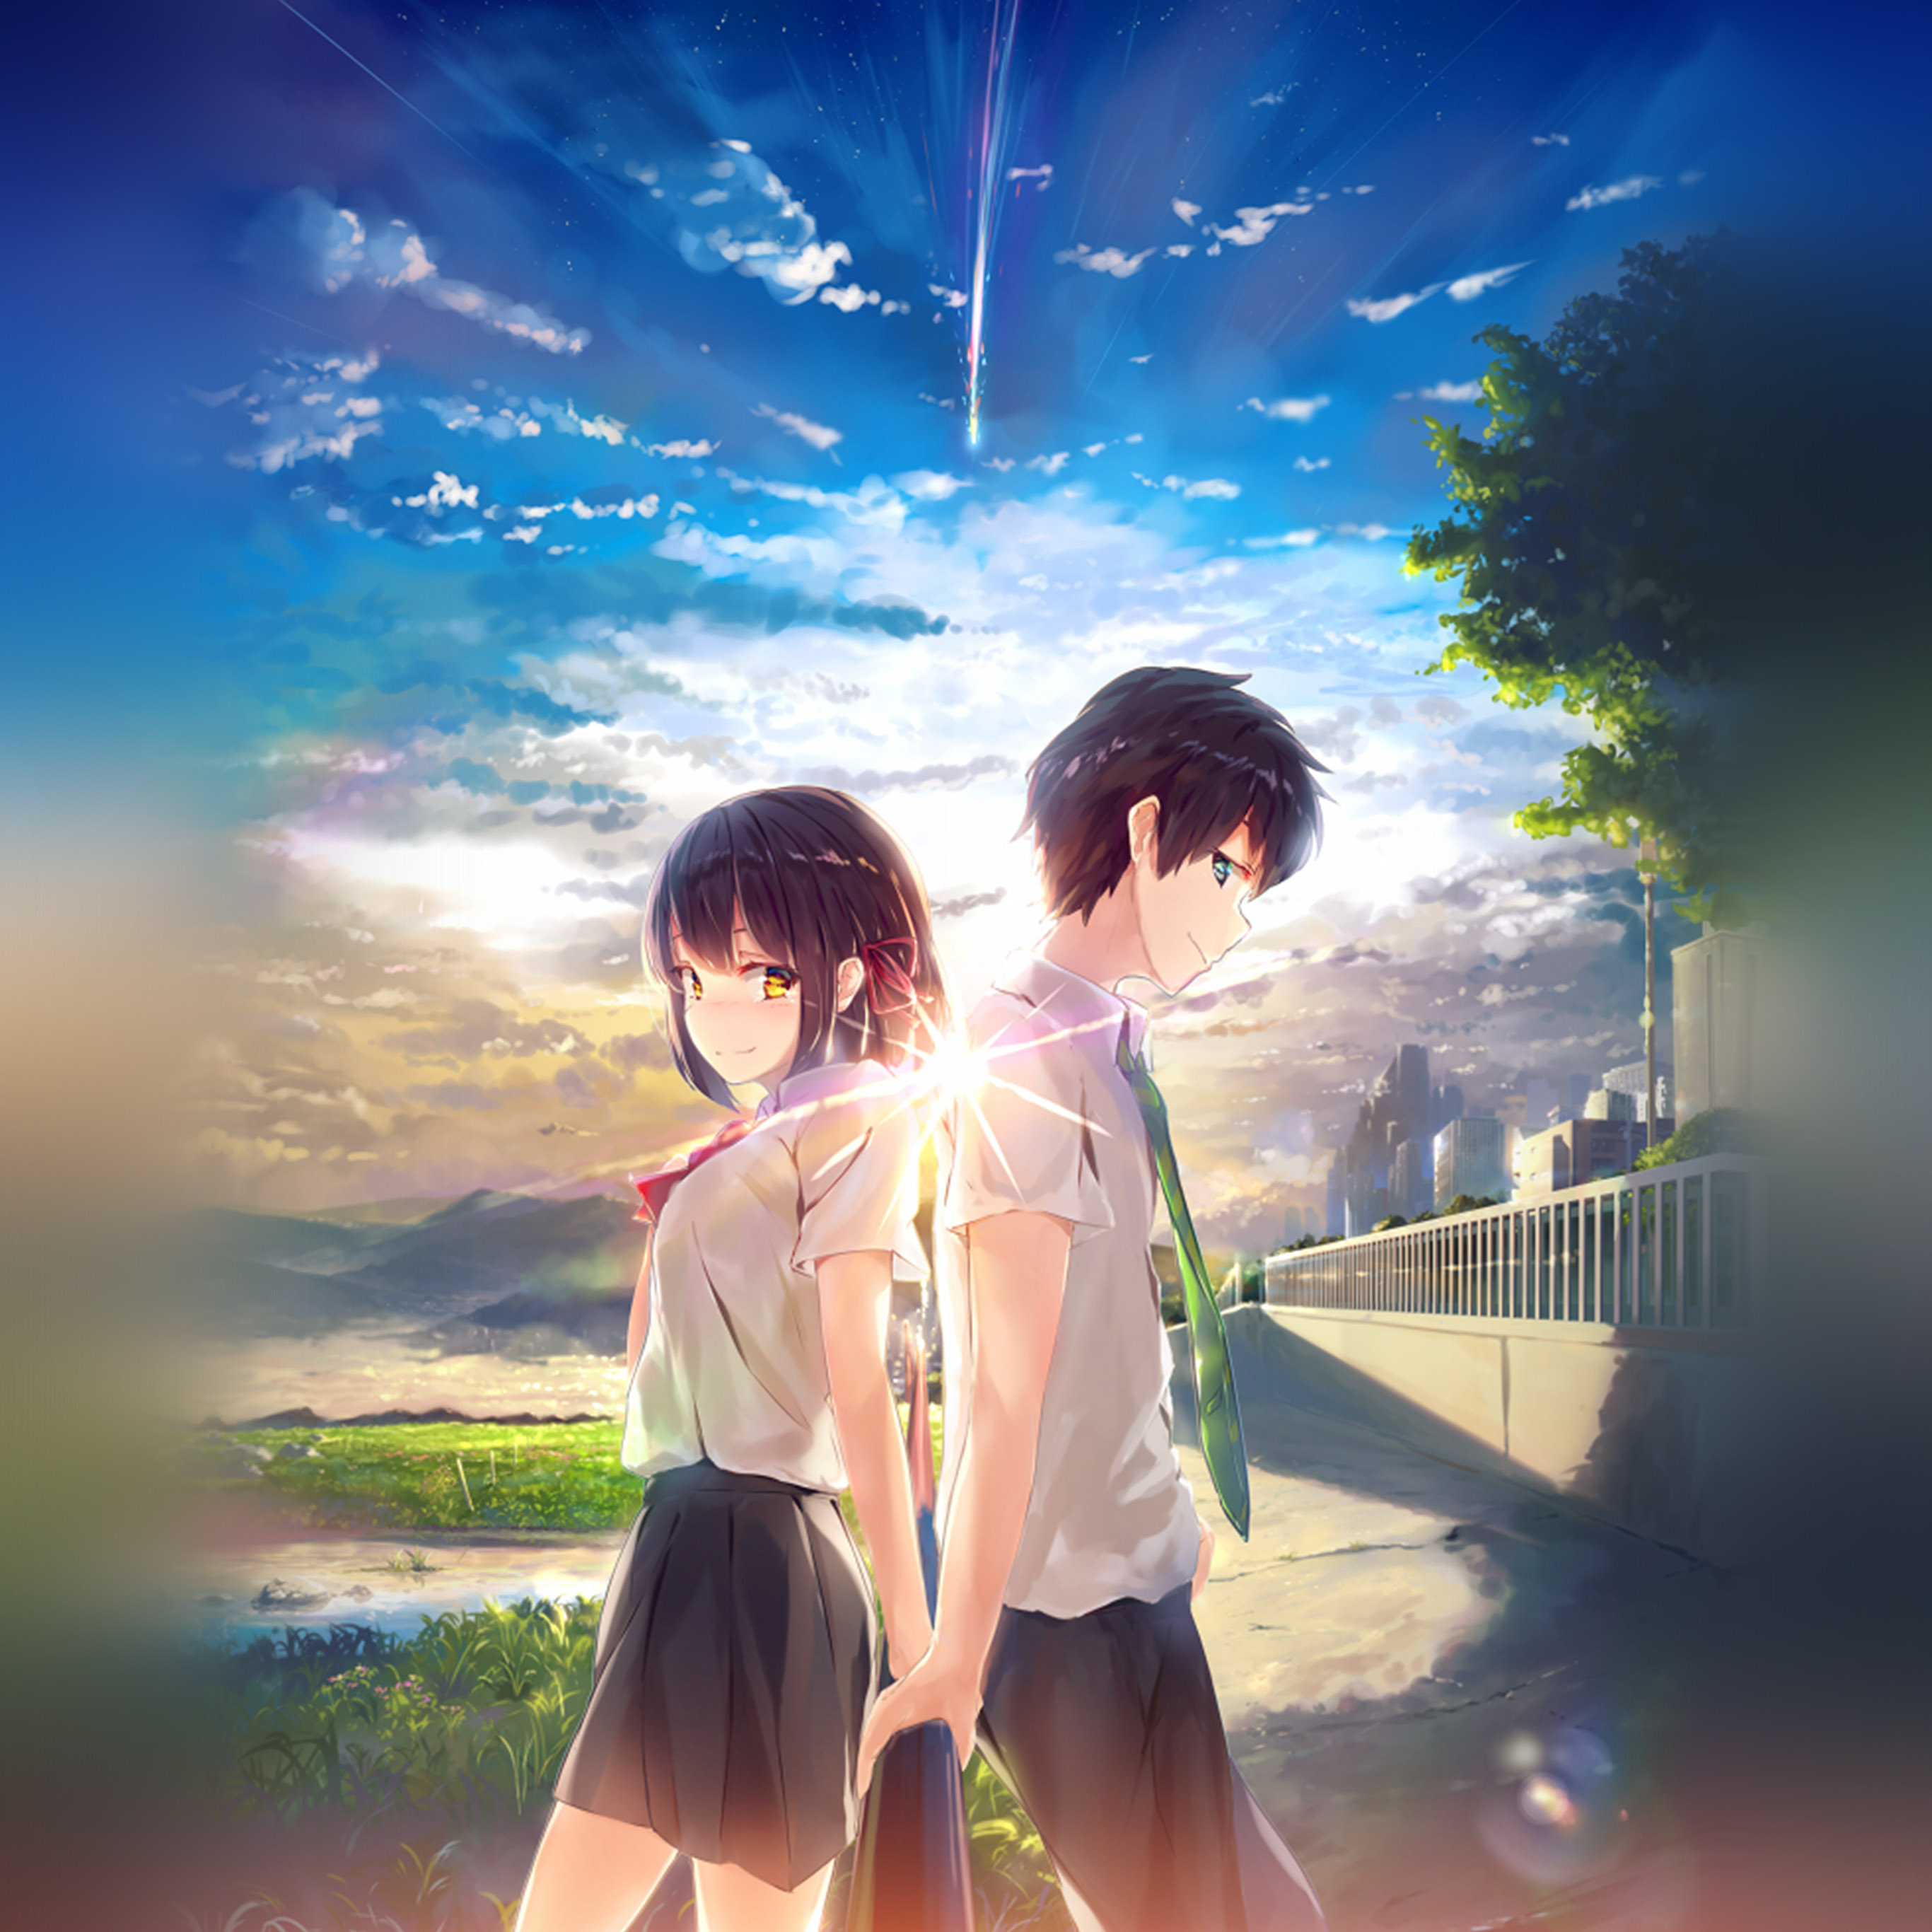 Your Name Wallpaper Android Hd - HD Wallpaper 